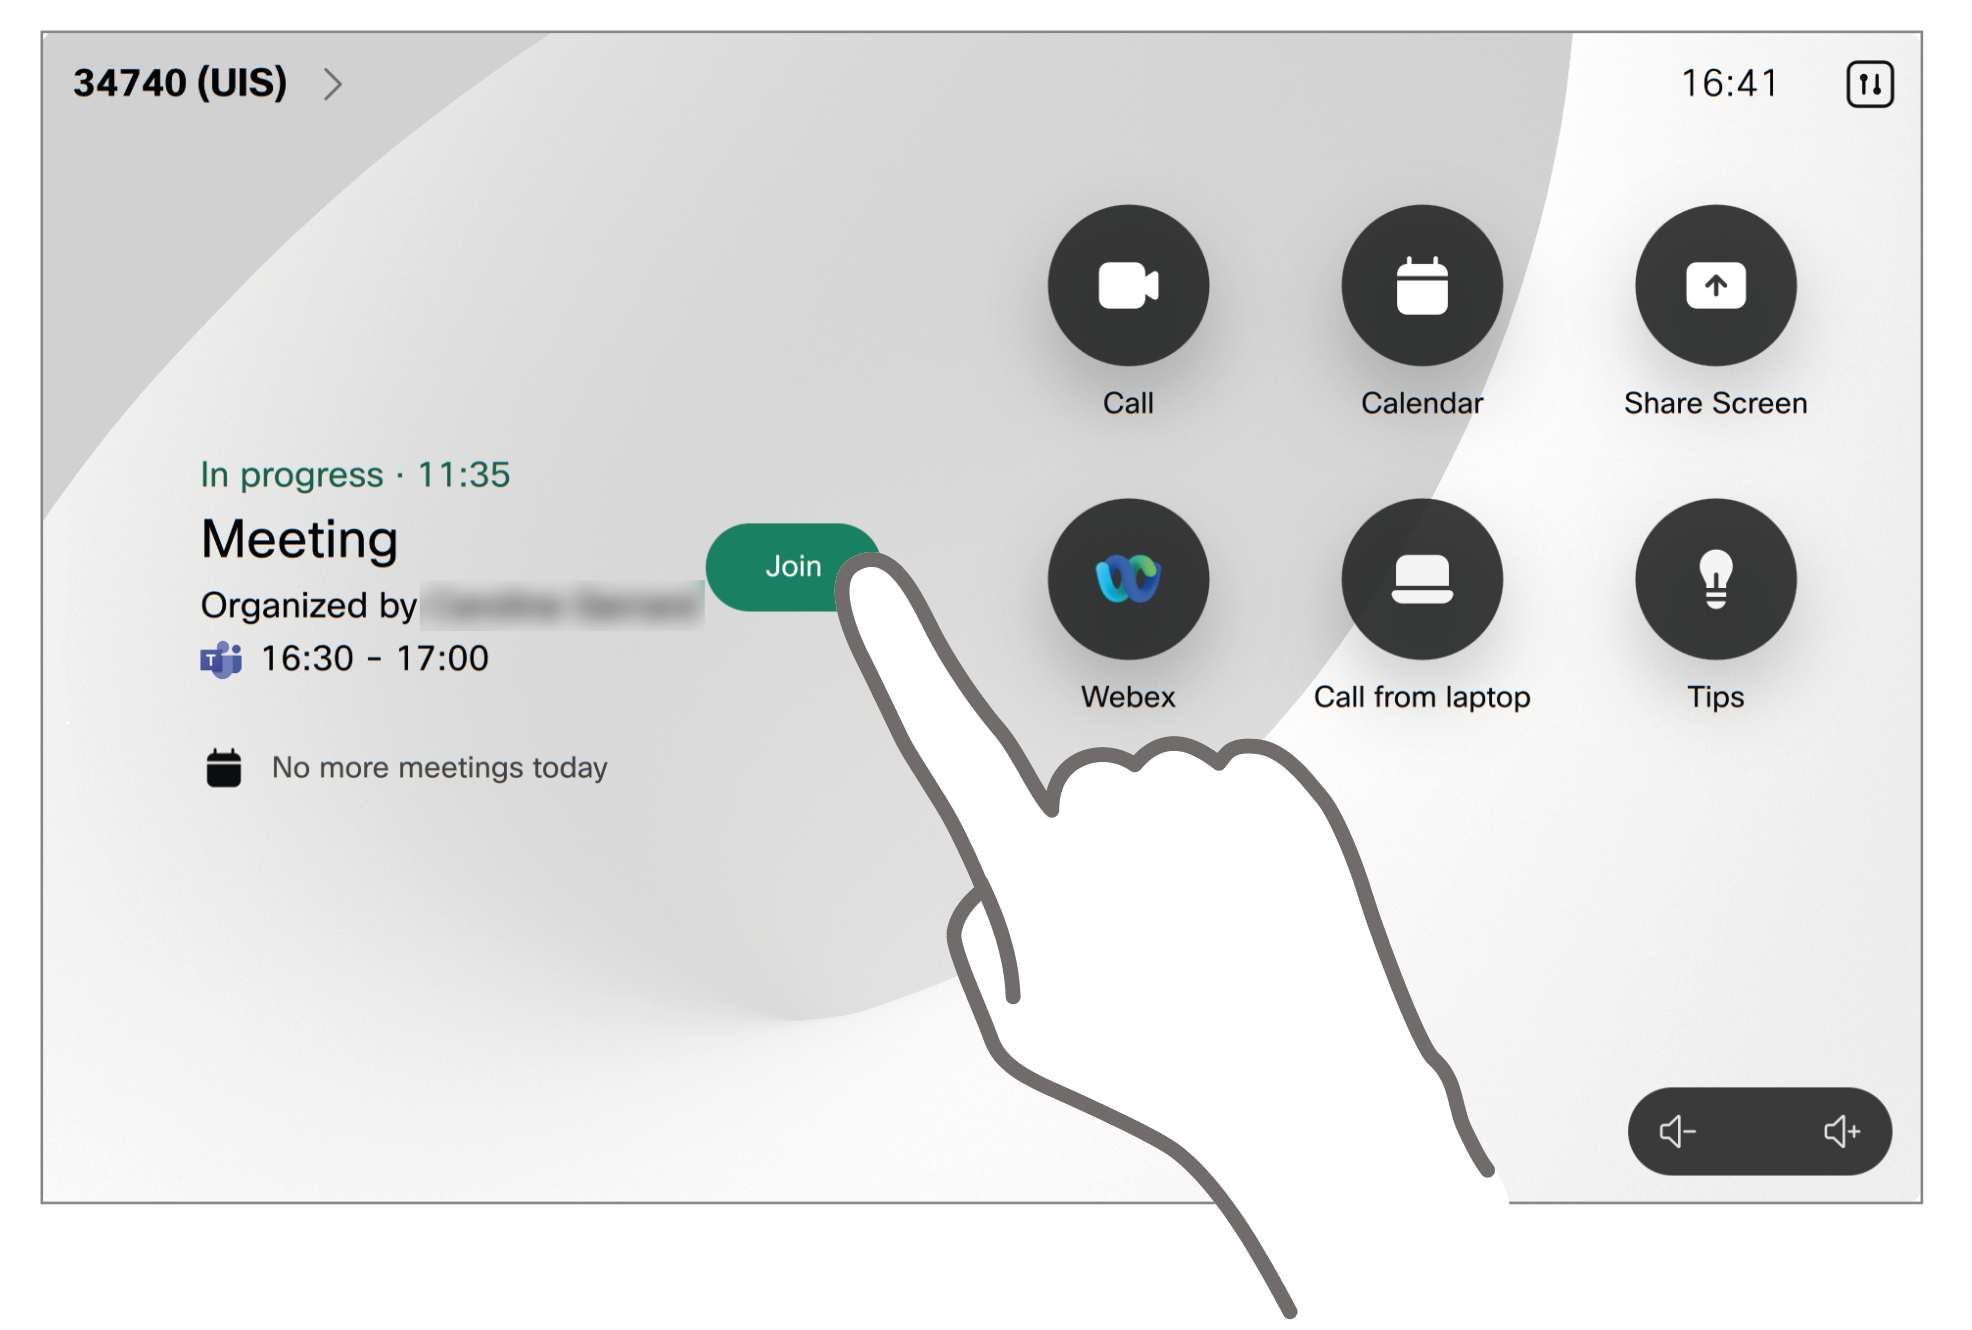 Join a Teams meeting by tapping the Join button on the desktop control panel